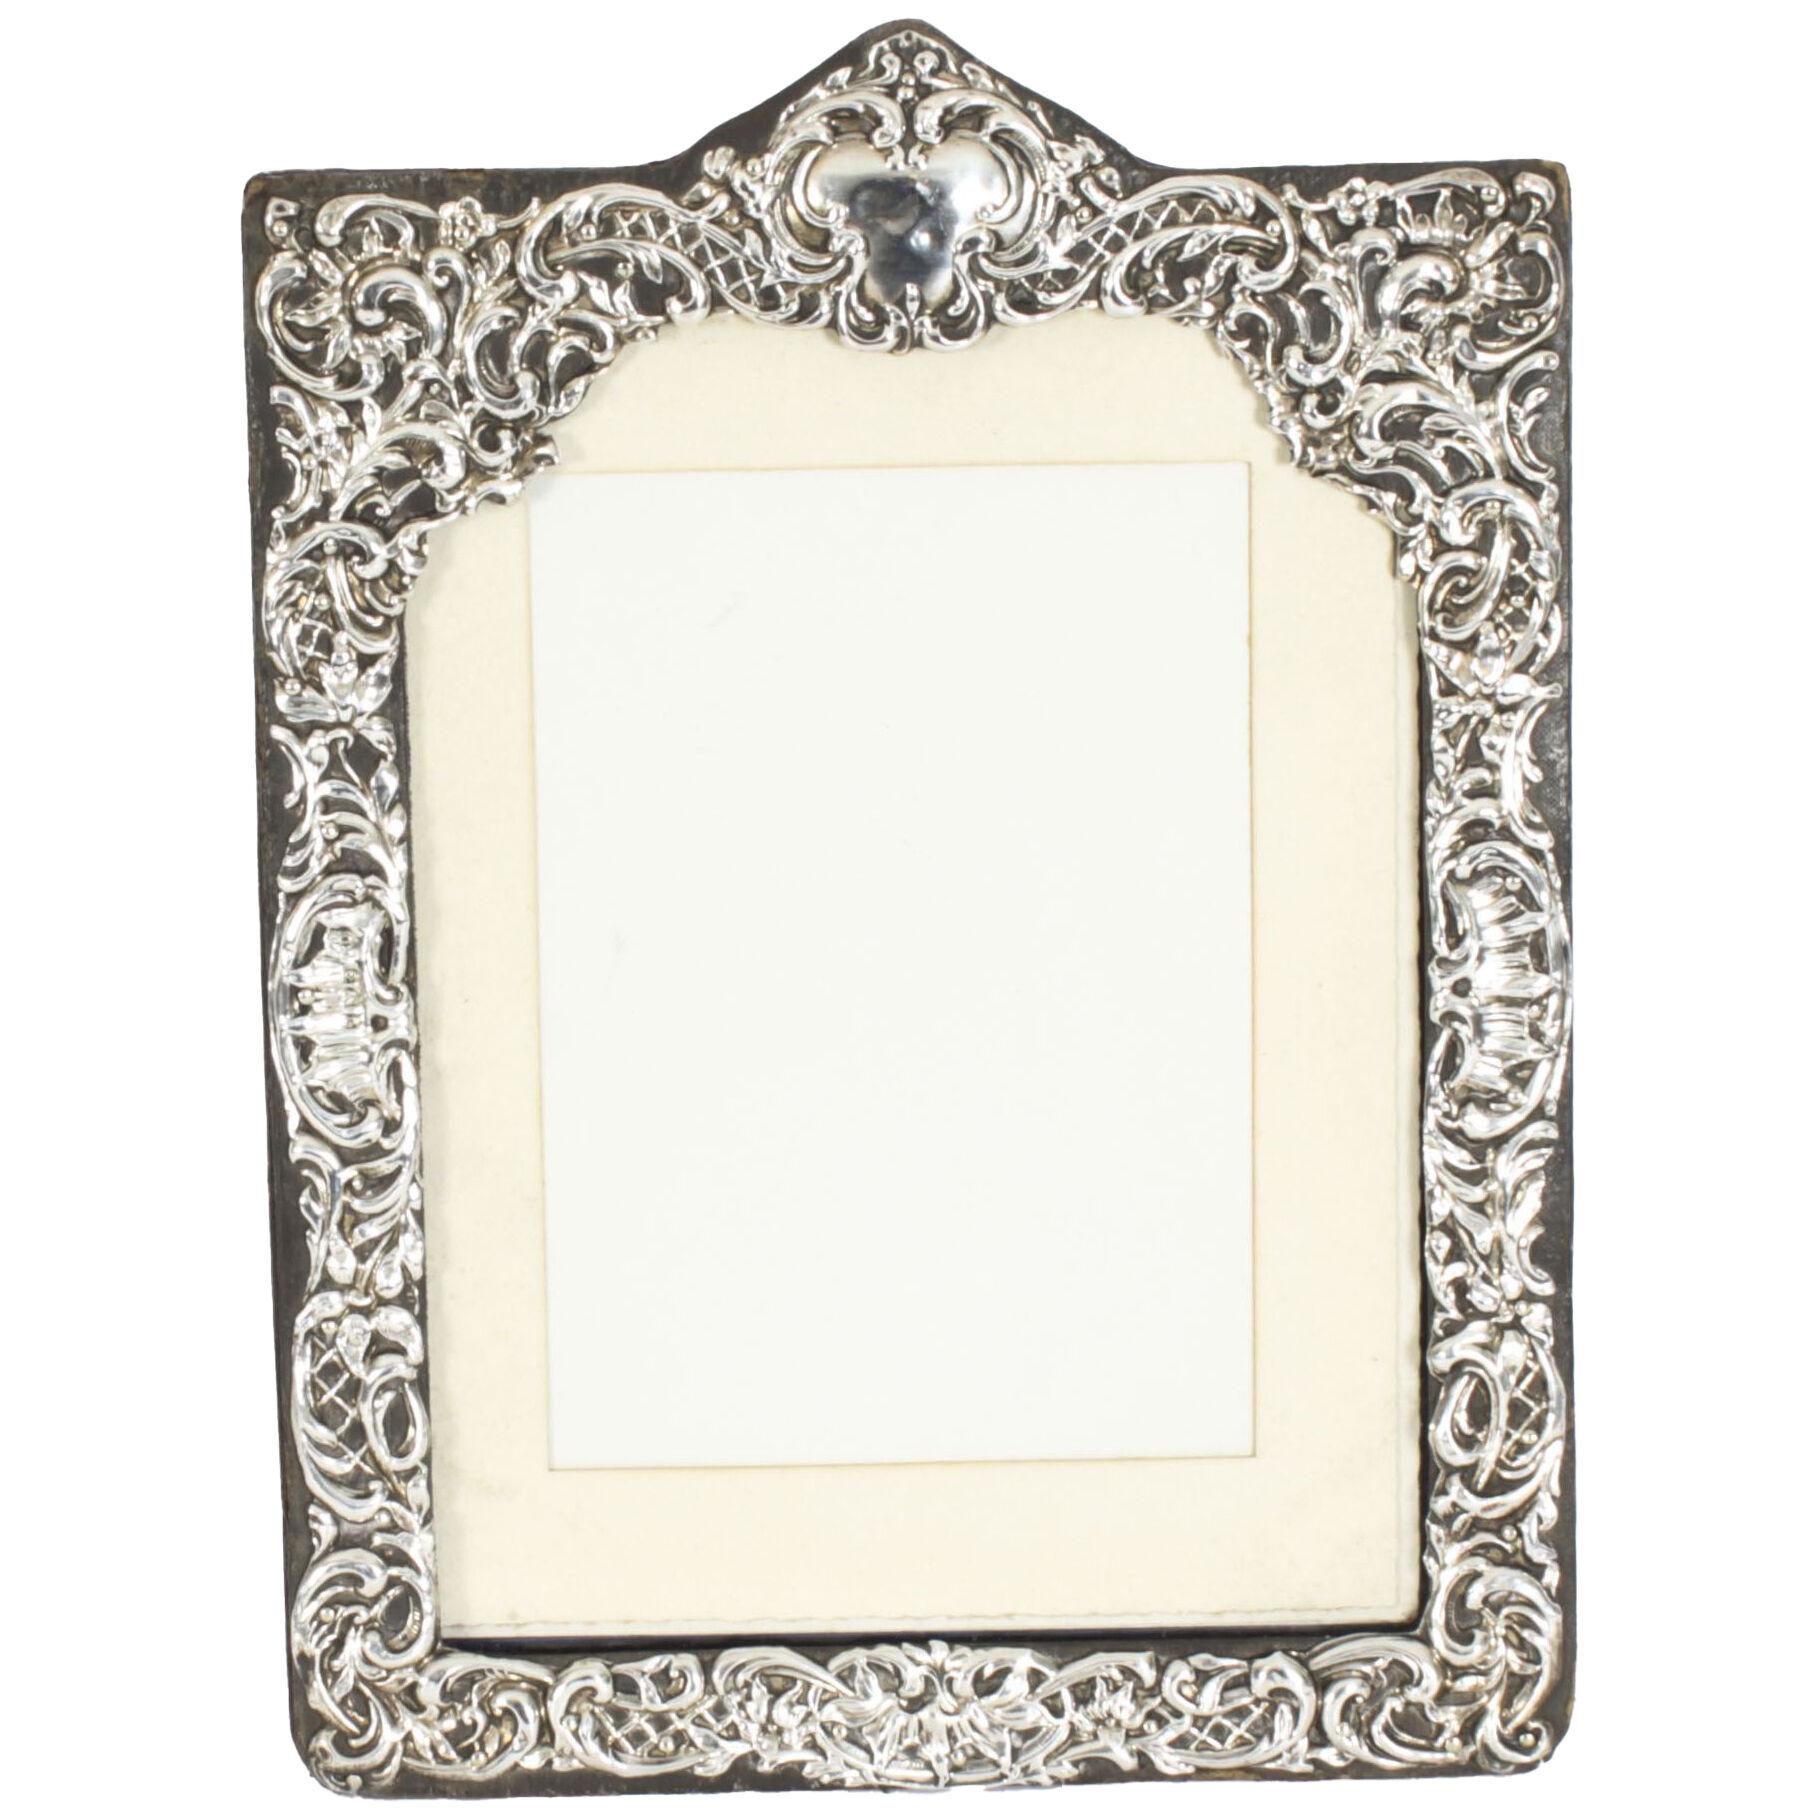 Antique Sterling Silver Photo Frame Dated 1902 27x20cm